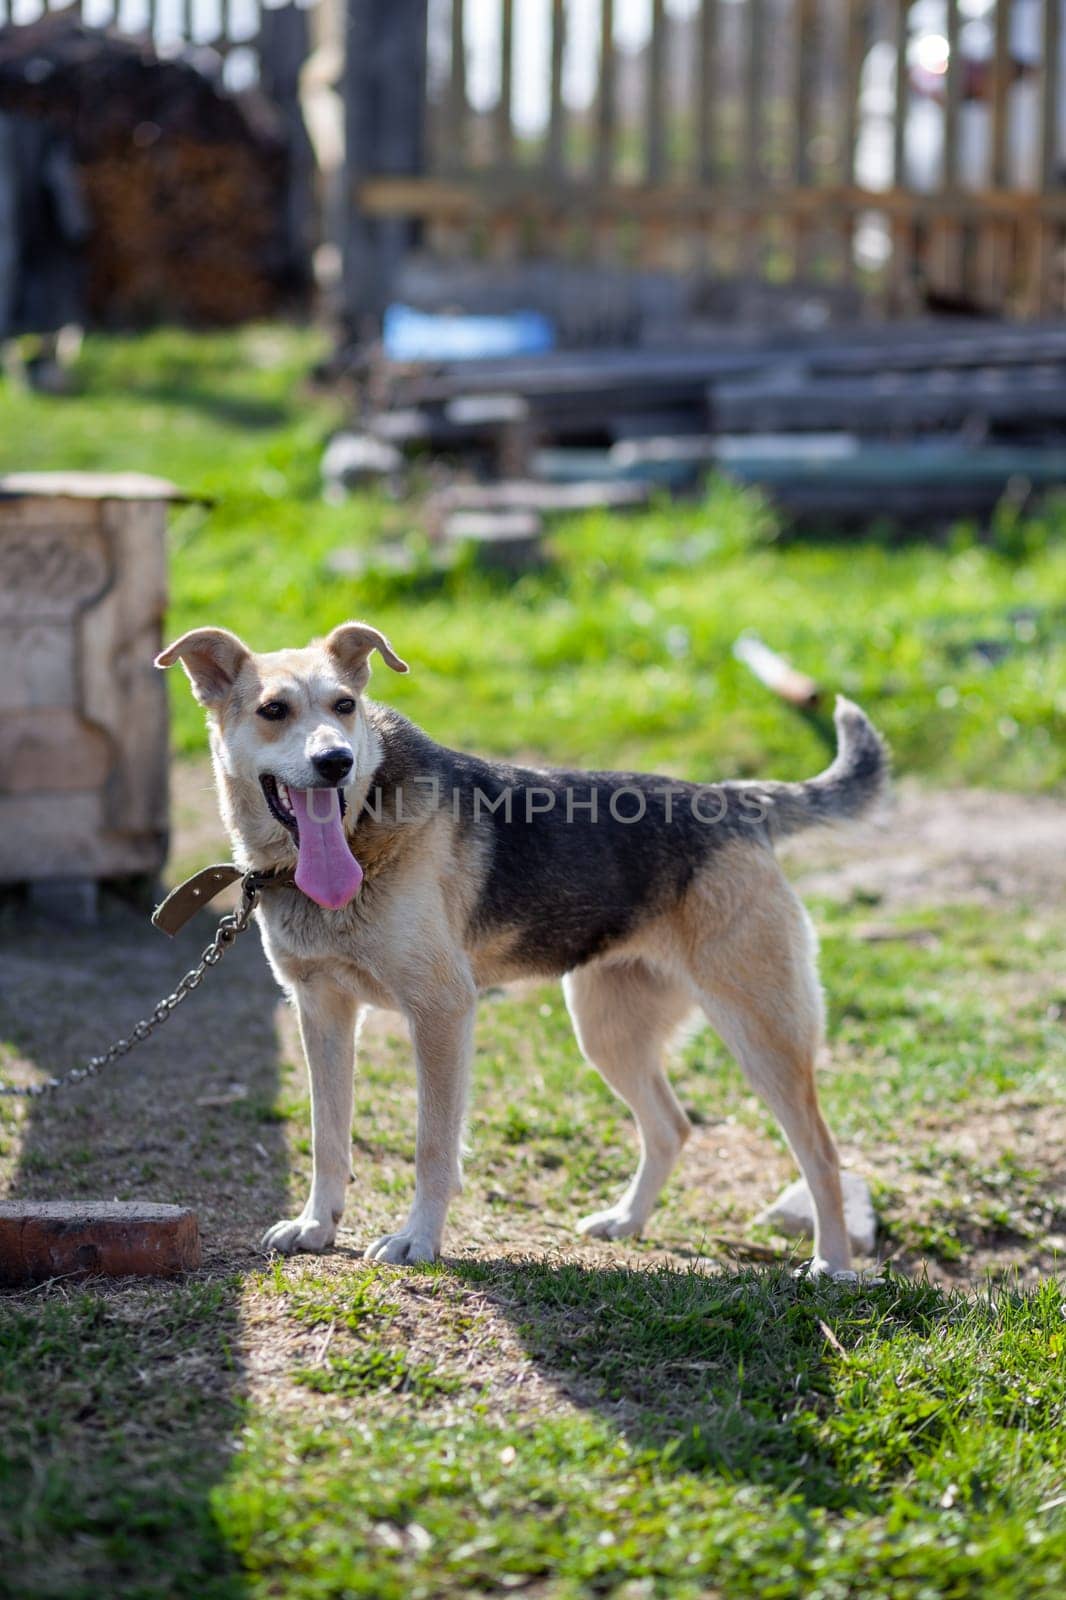 A cheerful big dog with a chain tongue sticking out. dog on a chain that guards the house. A happy pet with its mouth open. Simple dog house in the background